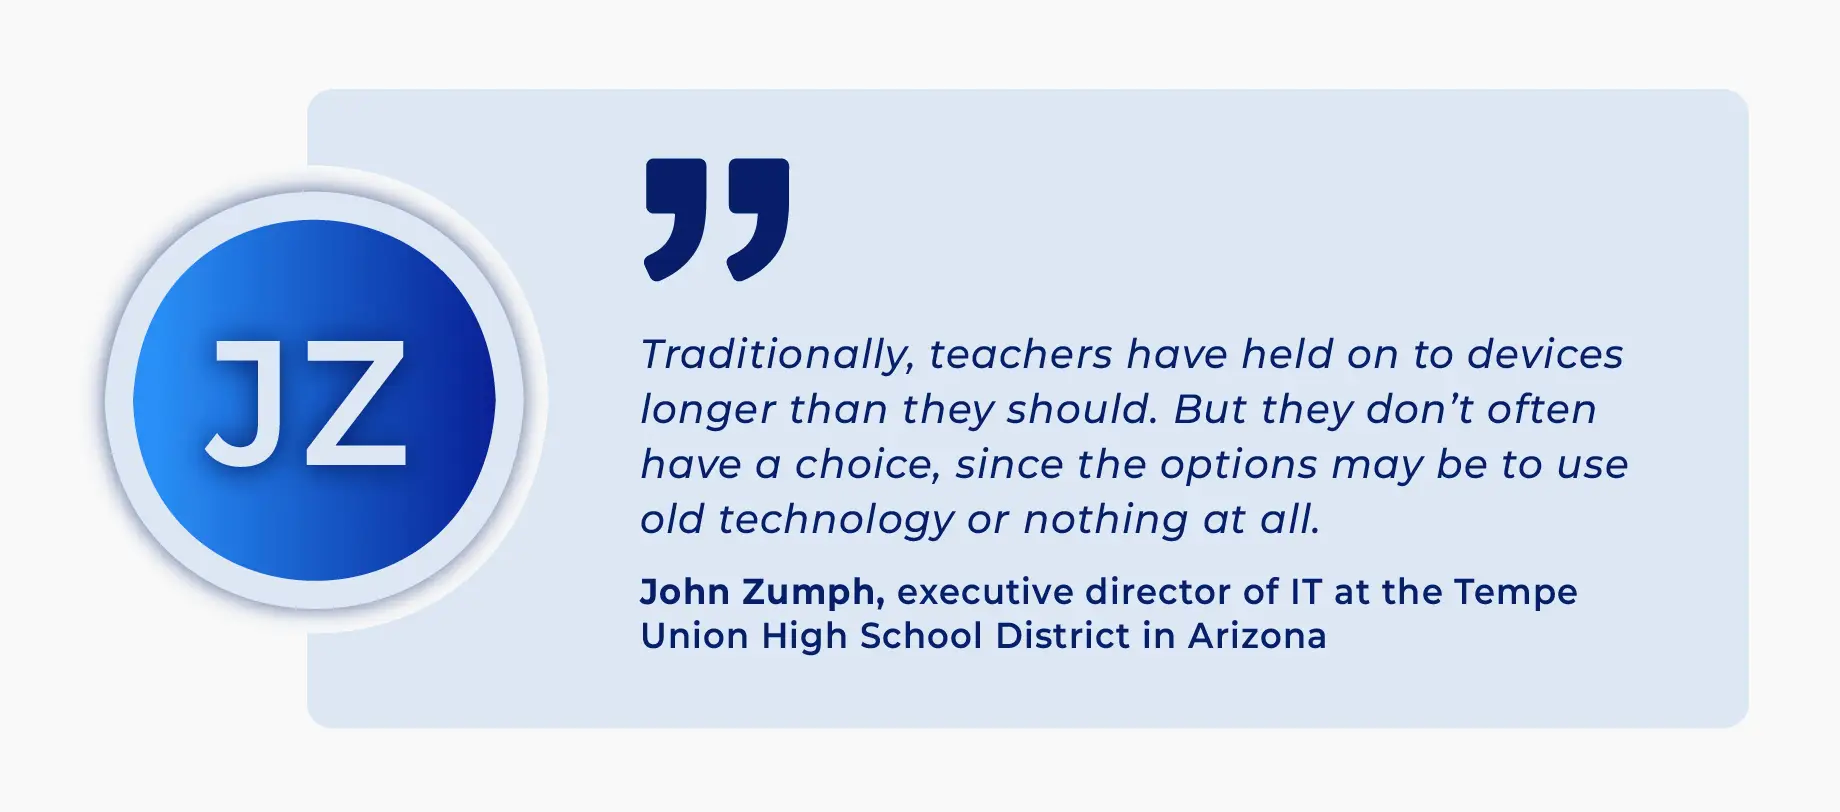 quote by John Zumph, executive director of IT at the Tempe Union High School District in Arizona